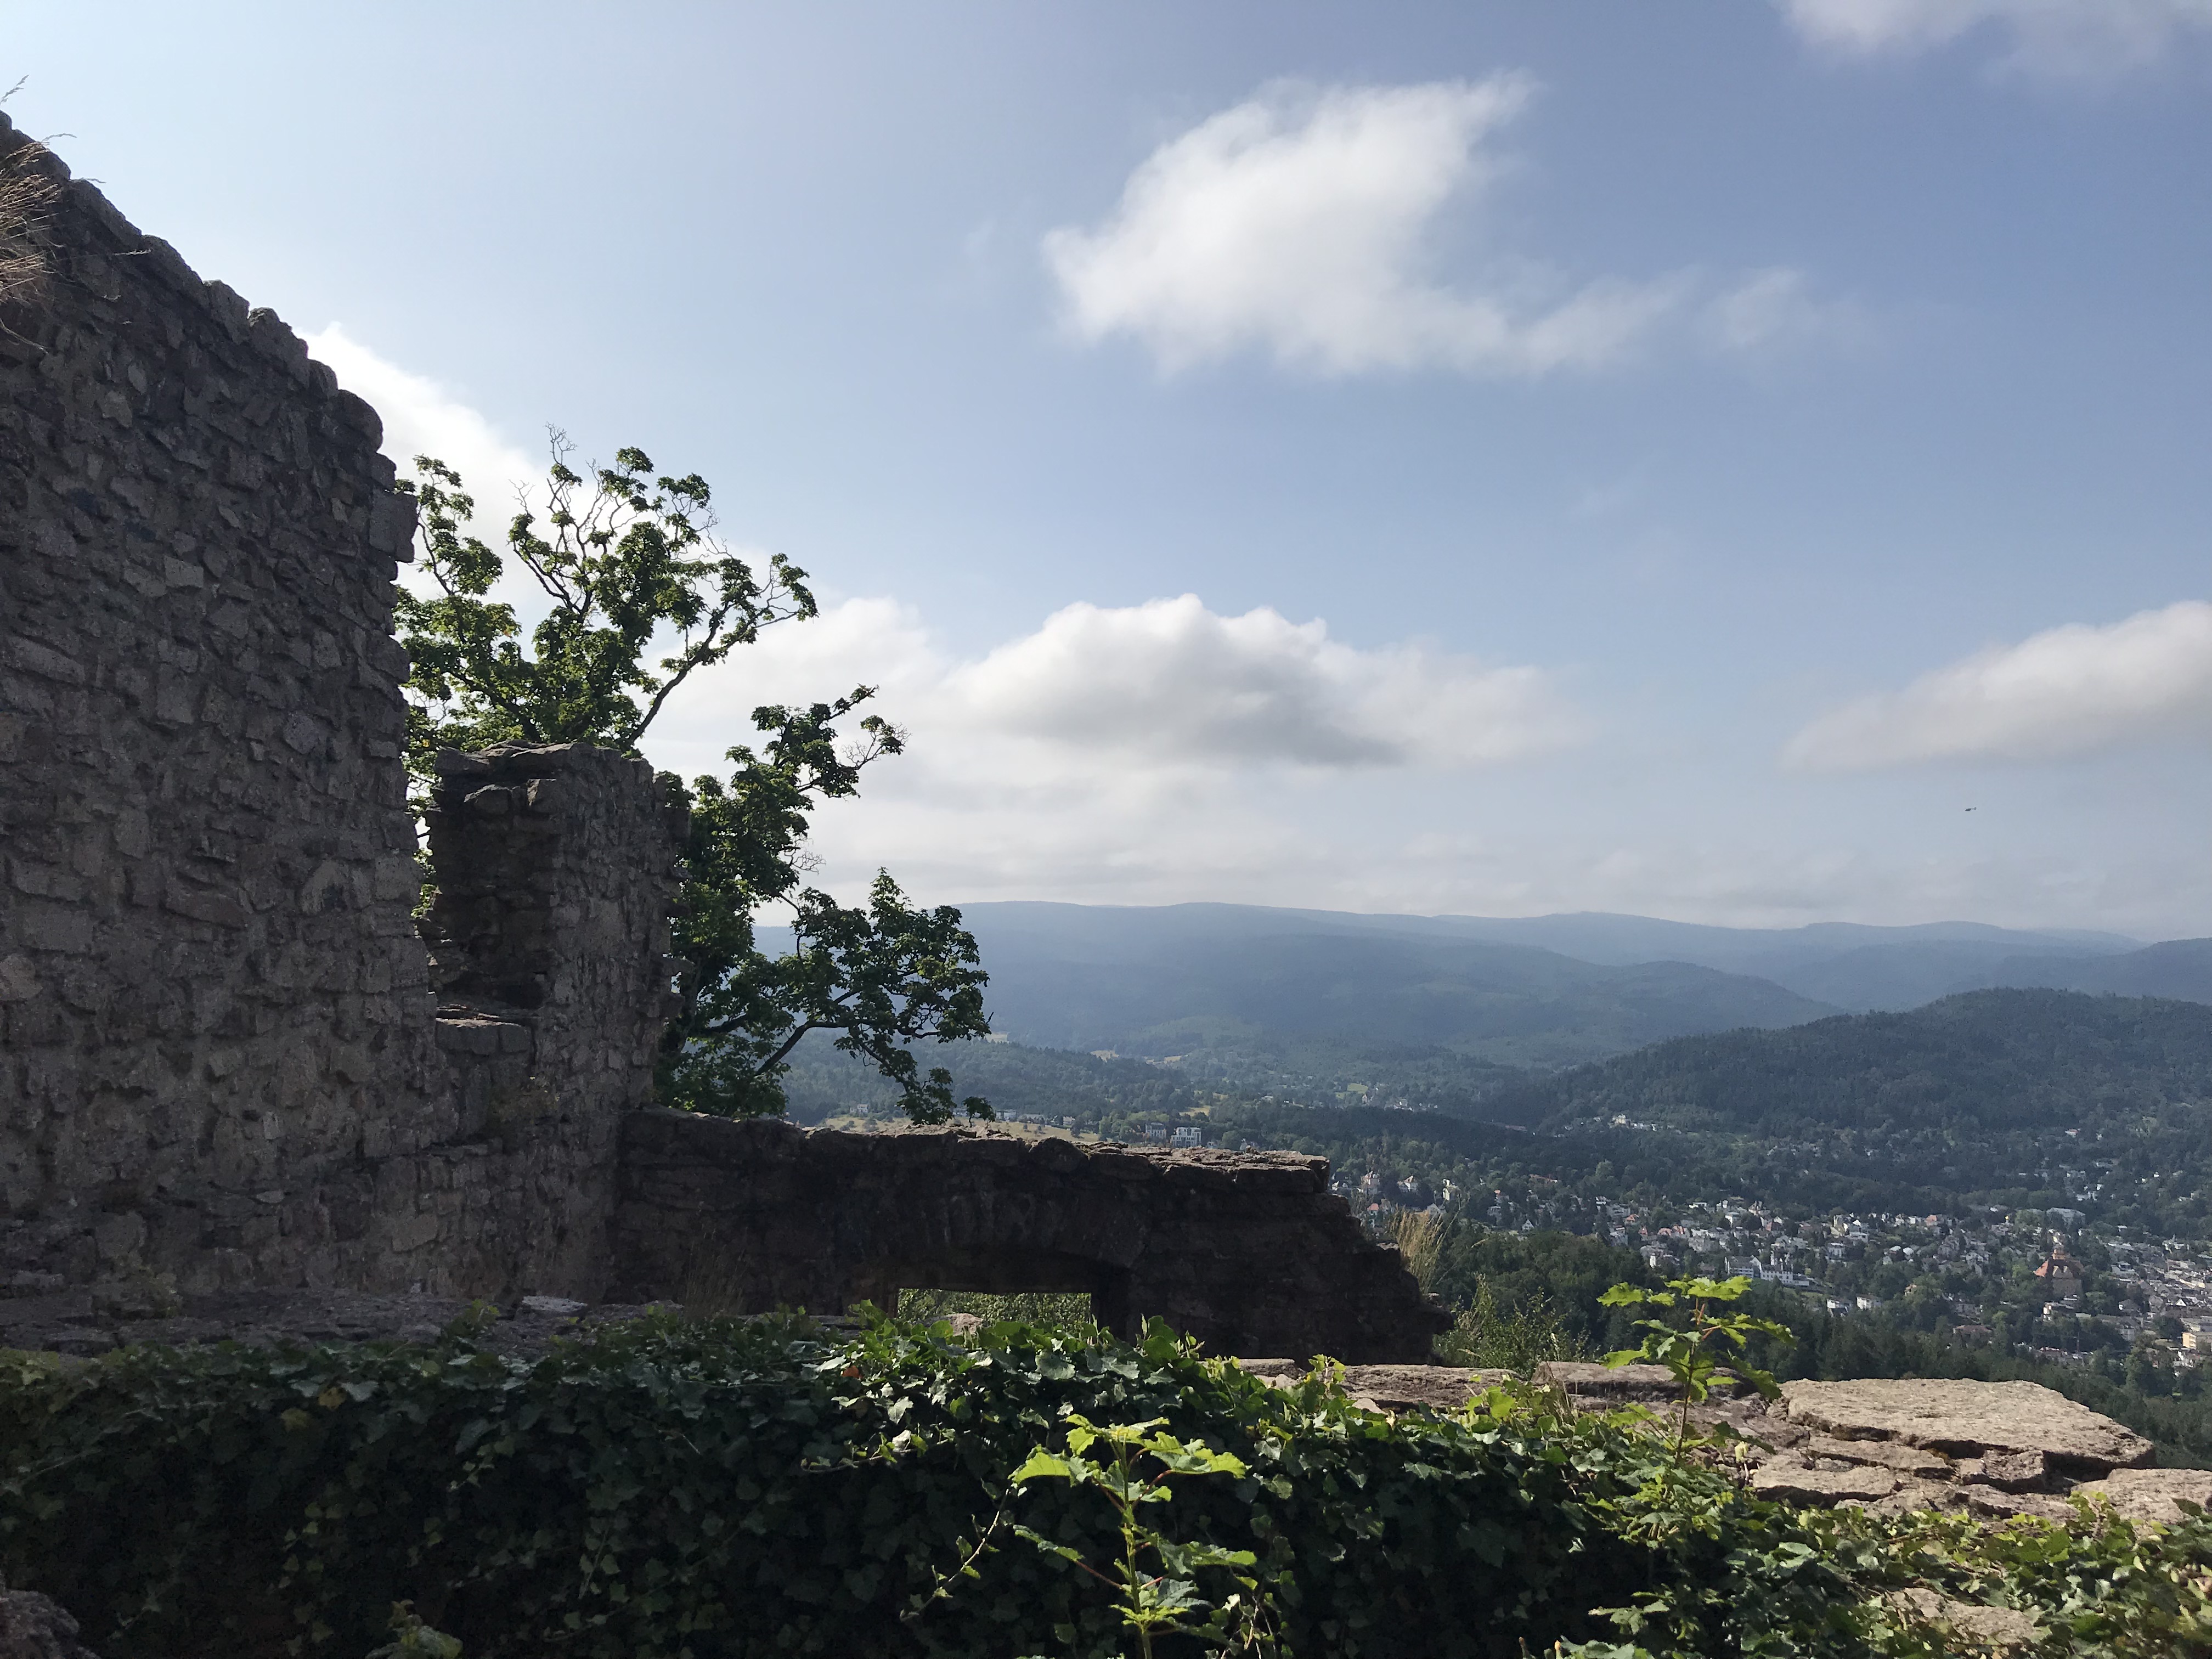 view across the valley from castle ruins